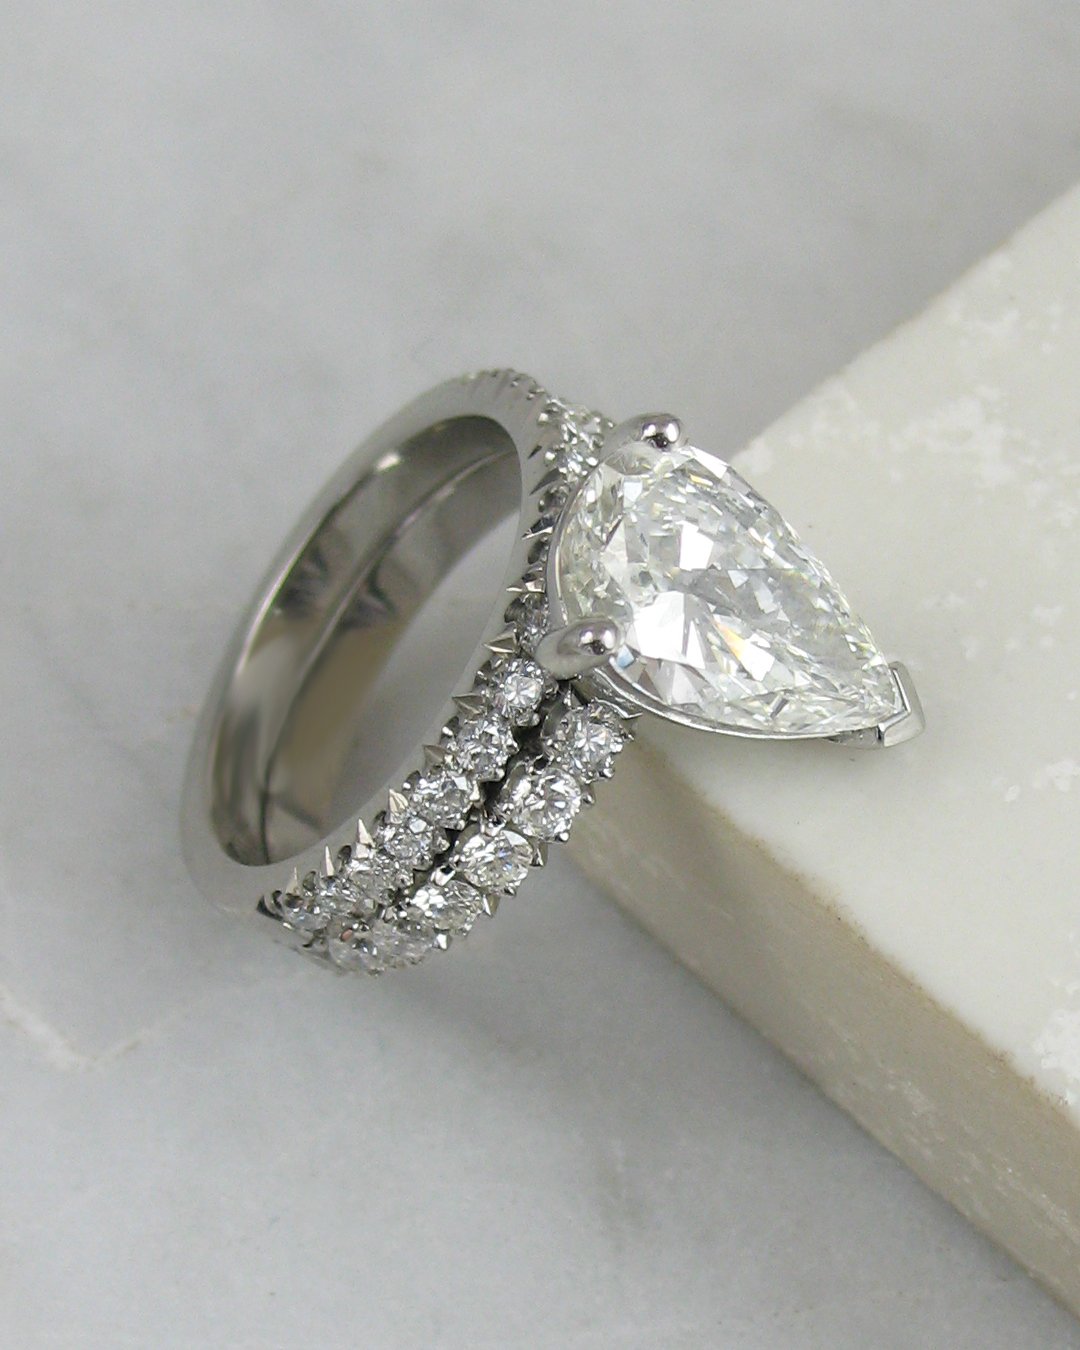 A matching wedding ring and pear shaped diamond engagement ring